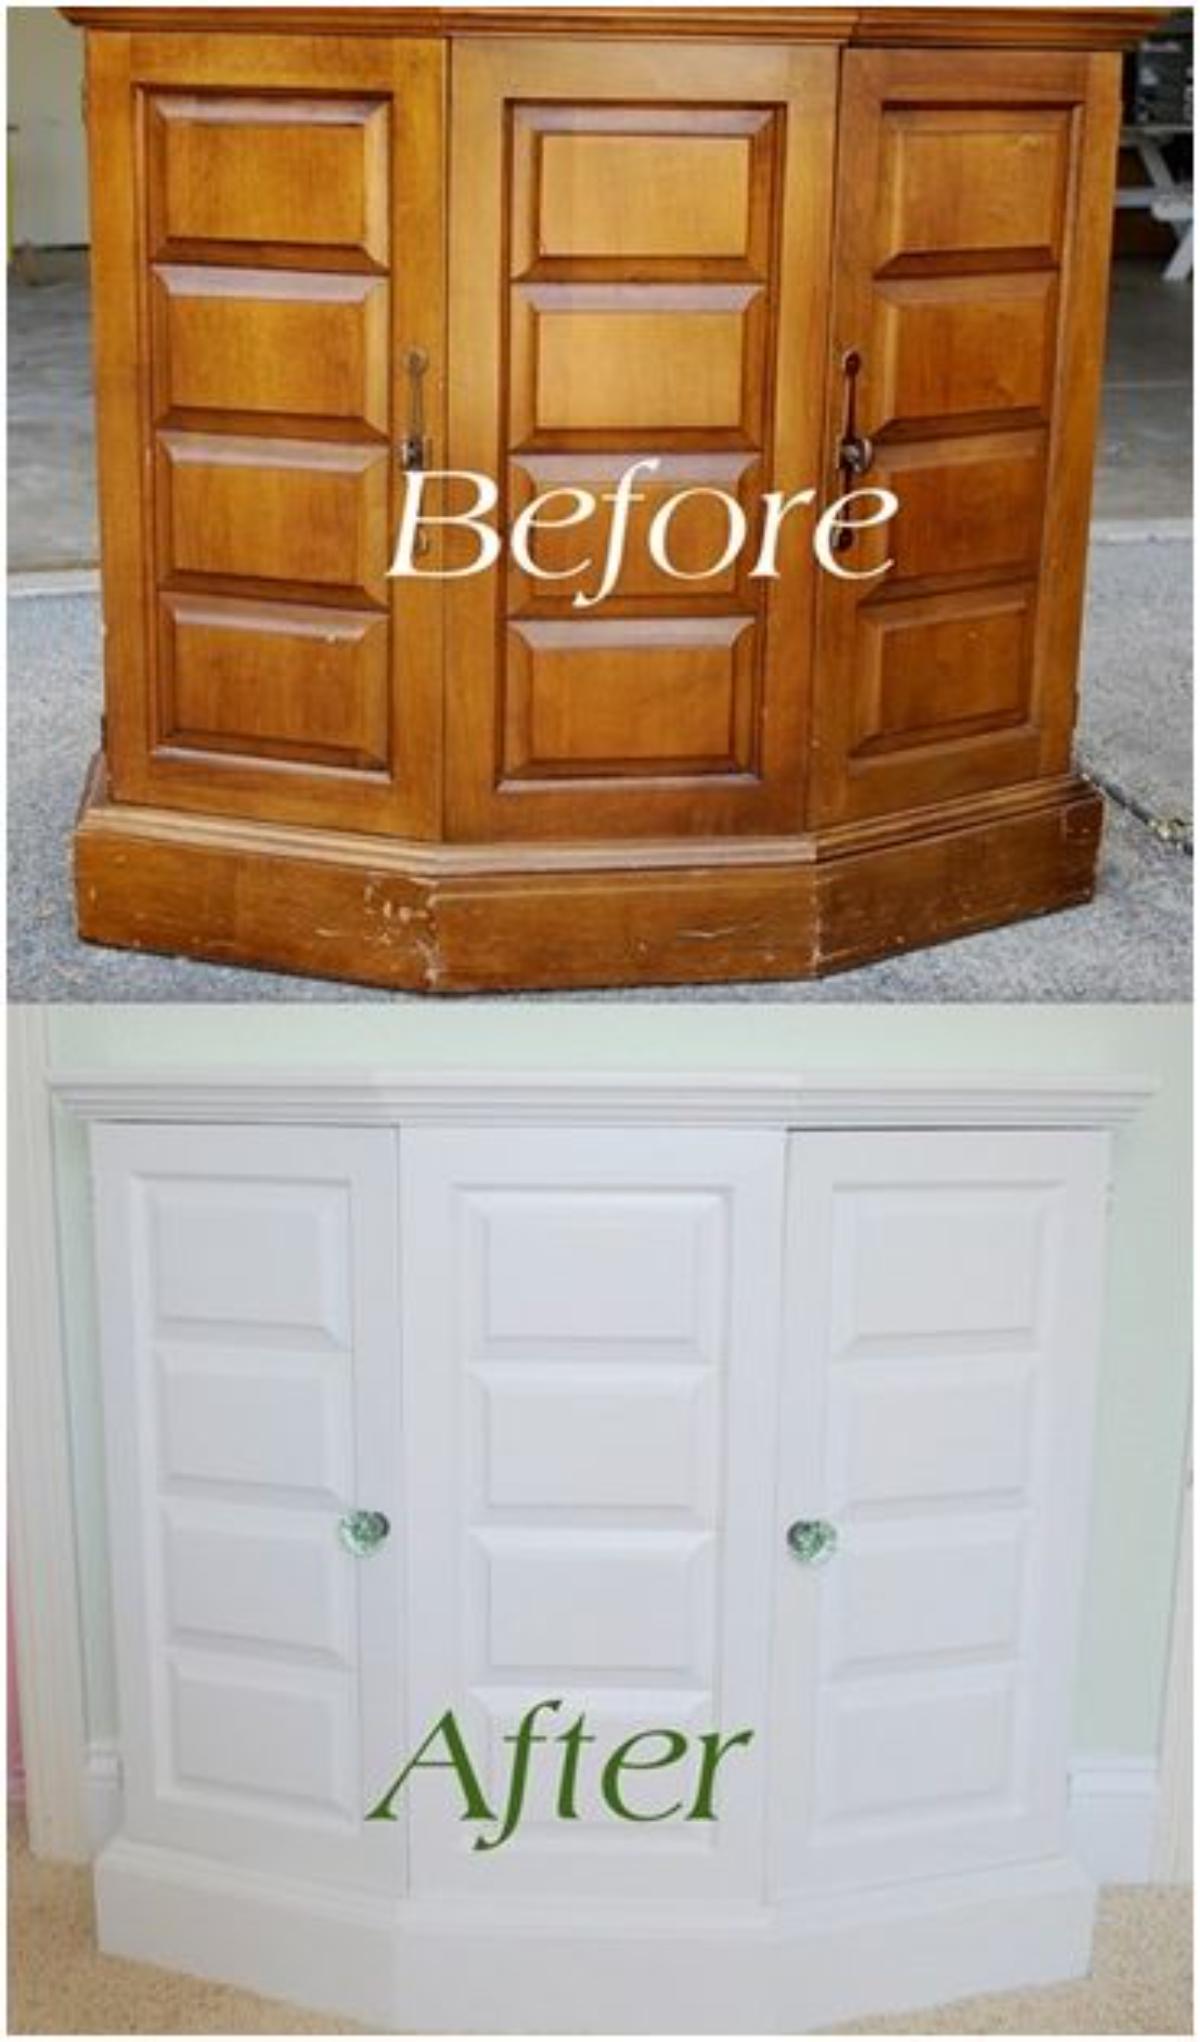 DIY: Painted Thrift Store Cabinet before and after.